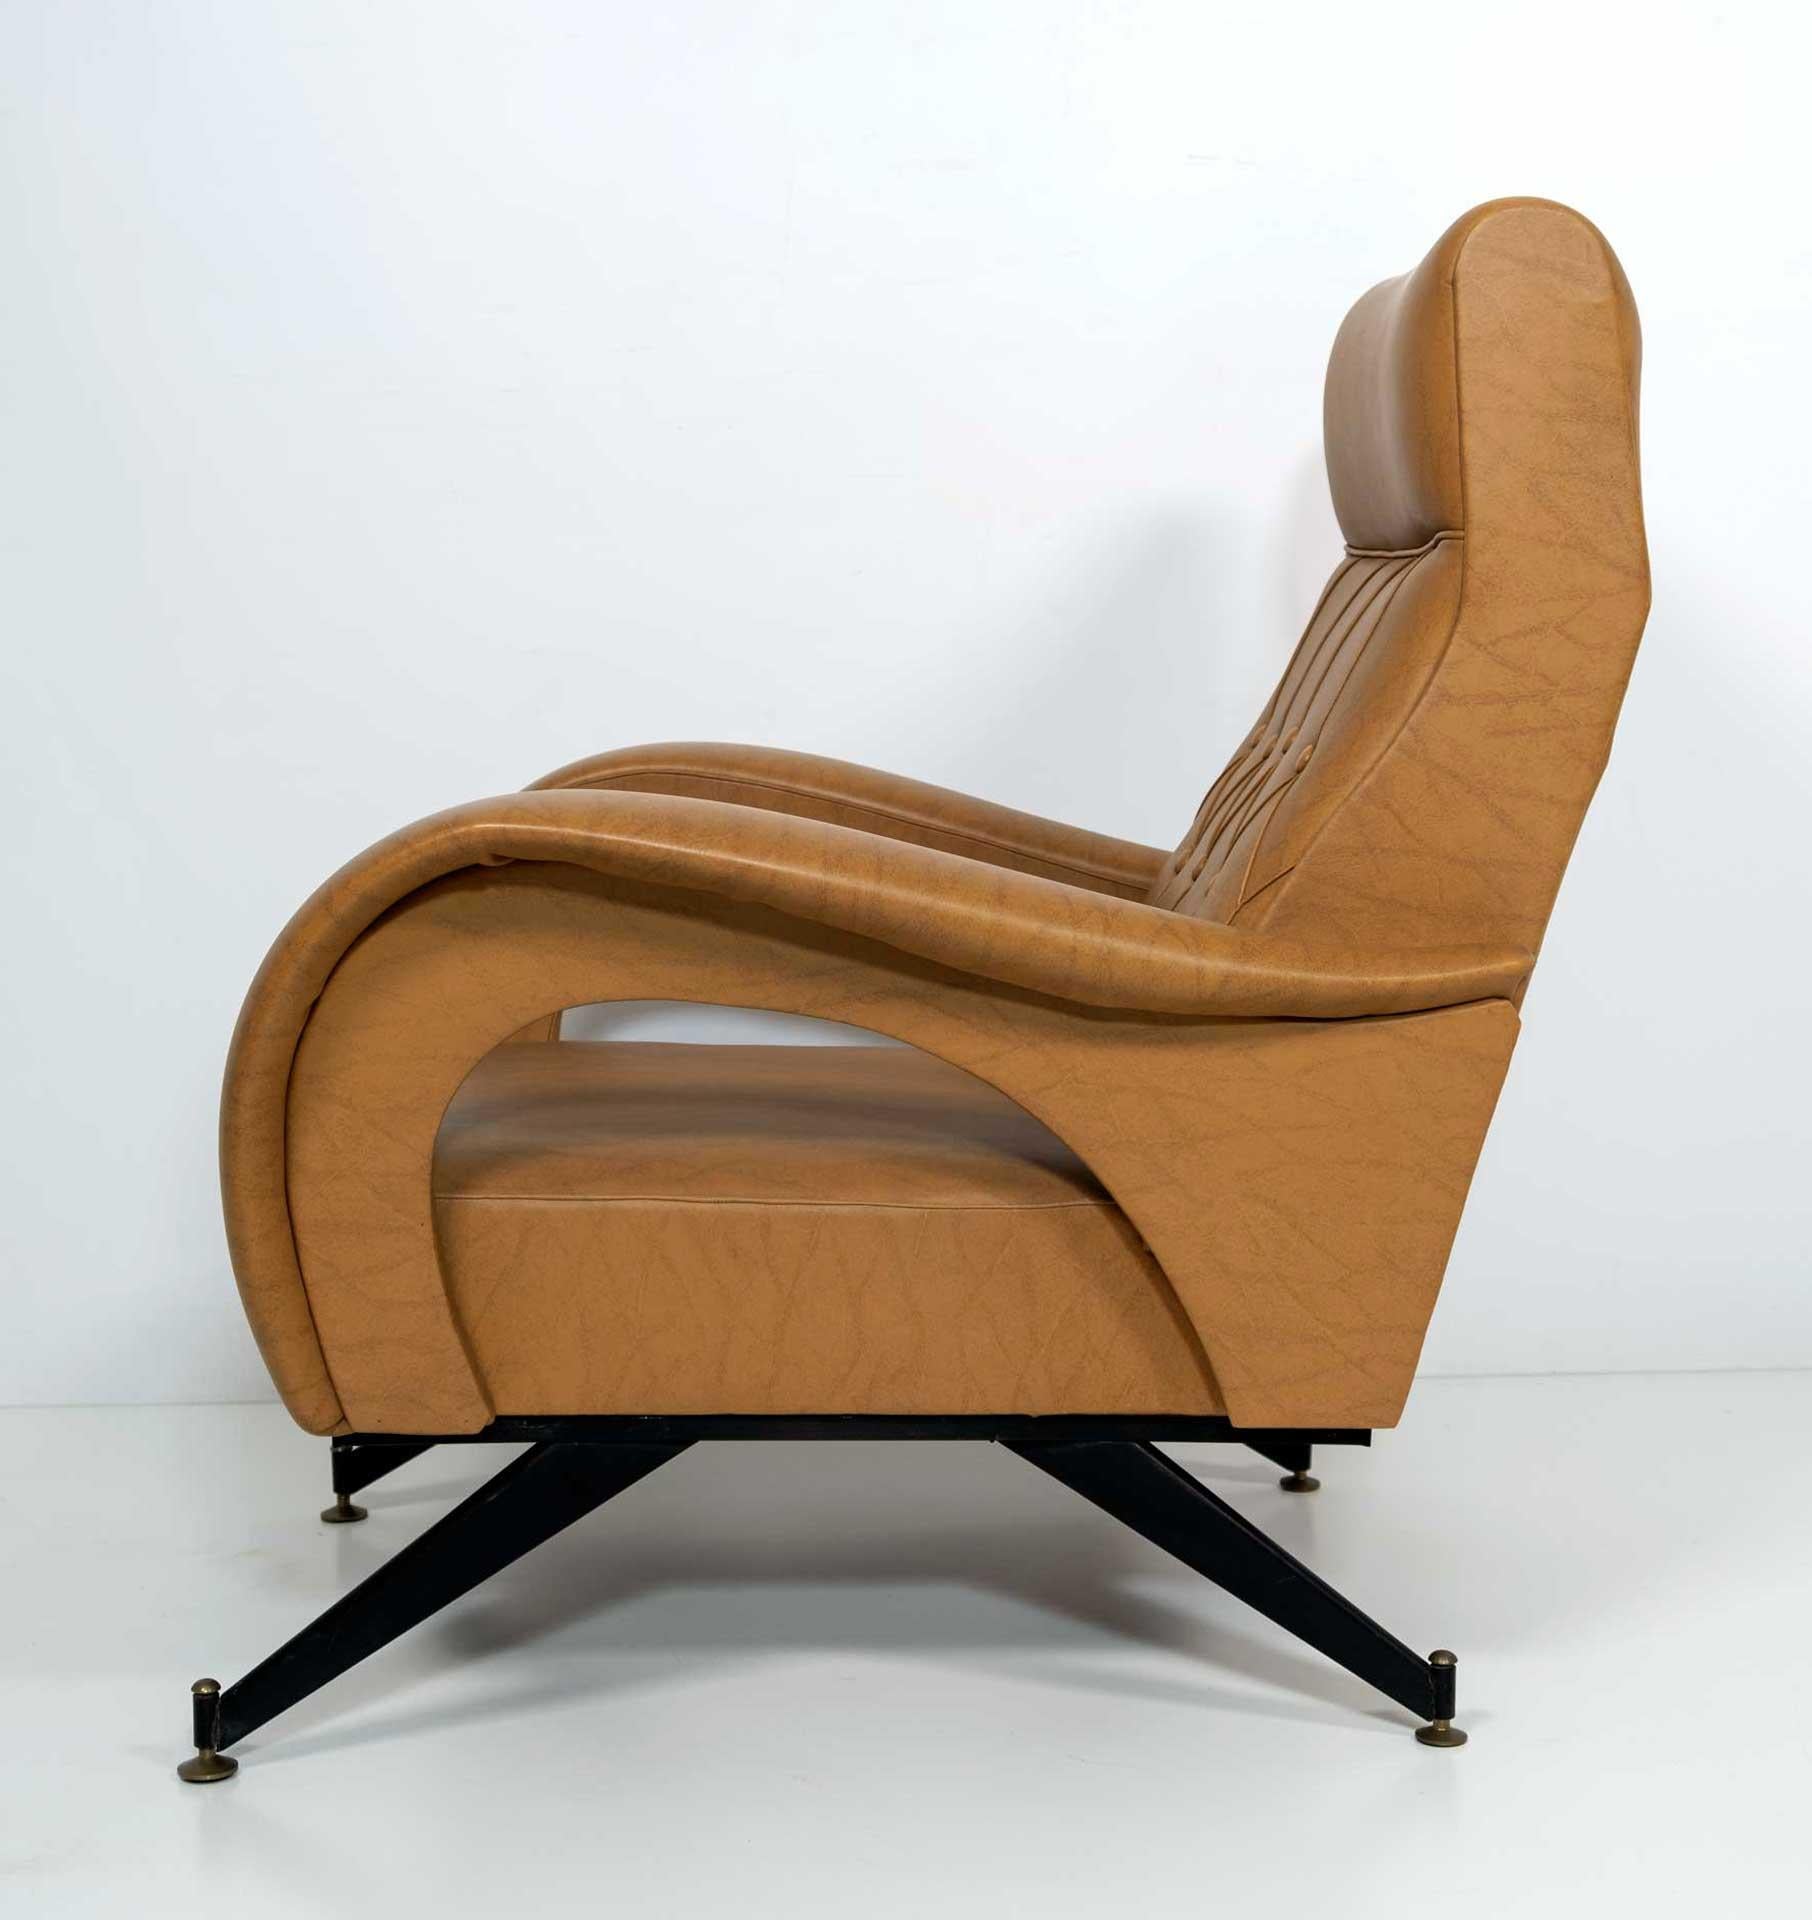 Metal Marco Zanuso Style Mid-Century Modern Italian Leather Lounge Chair, 1970s For Sale